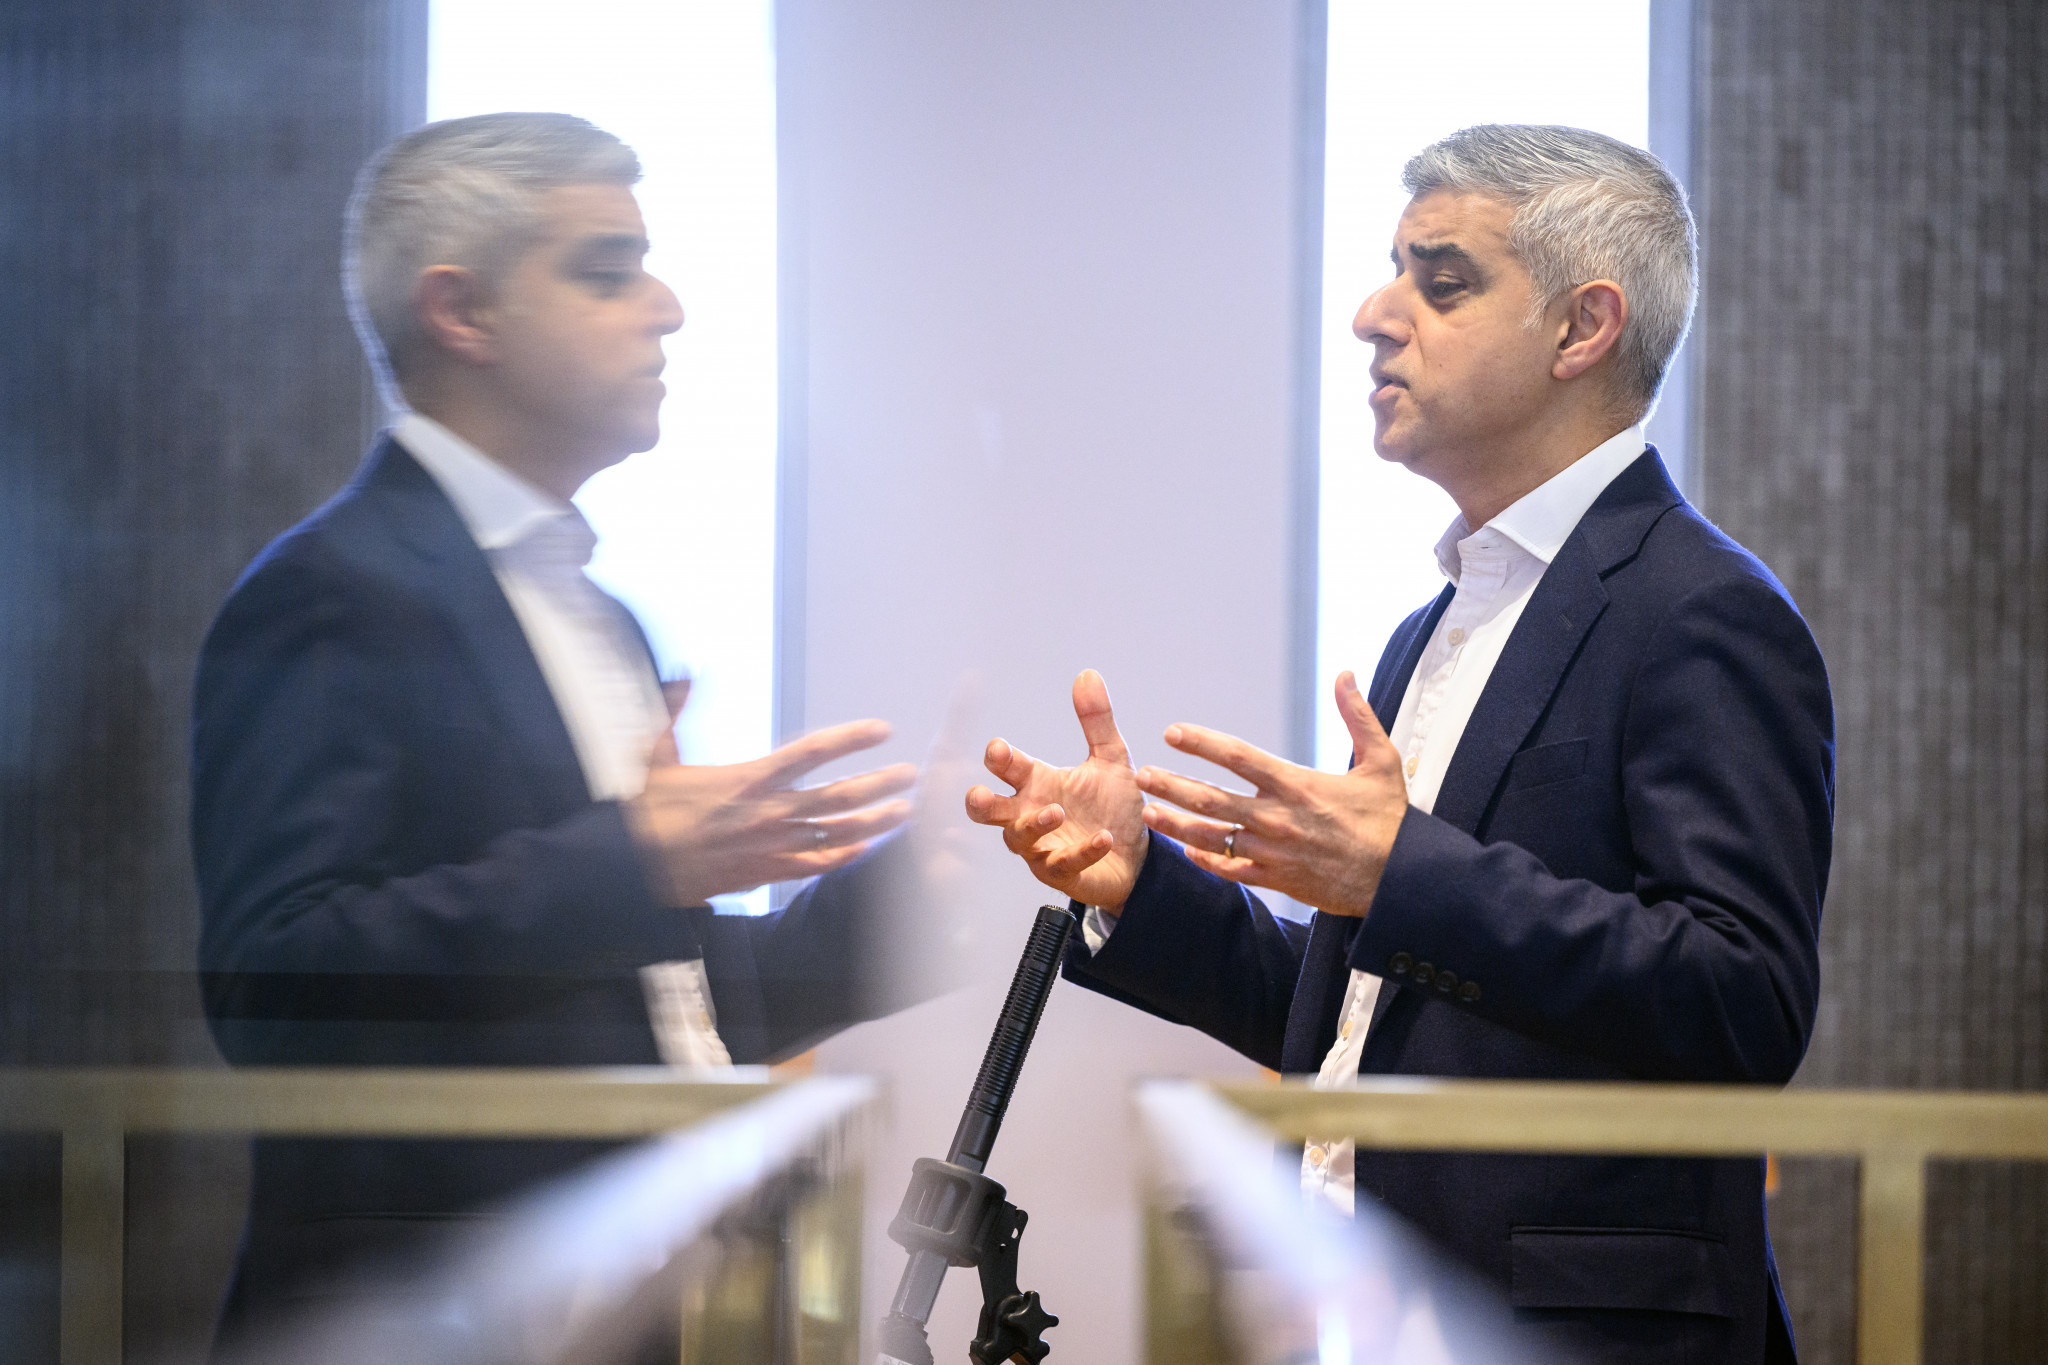 London Mayor Sadiq Khan pledged to explore an Olympic bid in his re-election campaign ©Getty Images